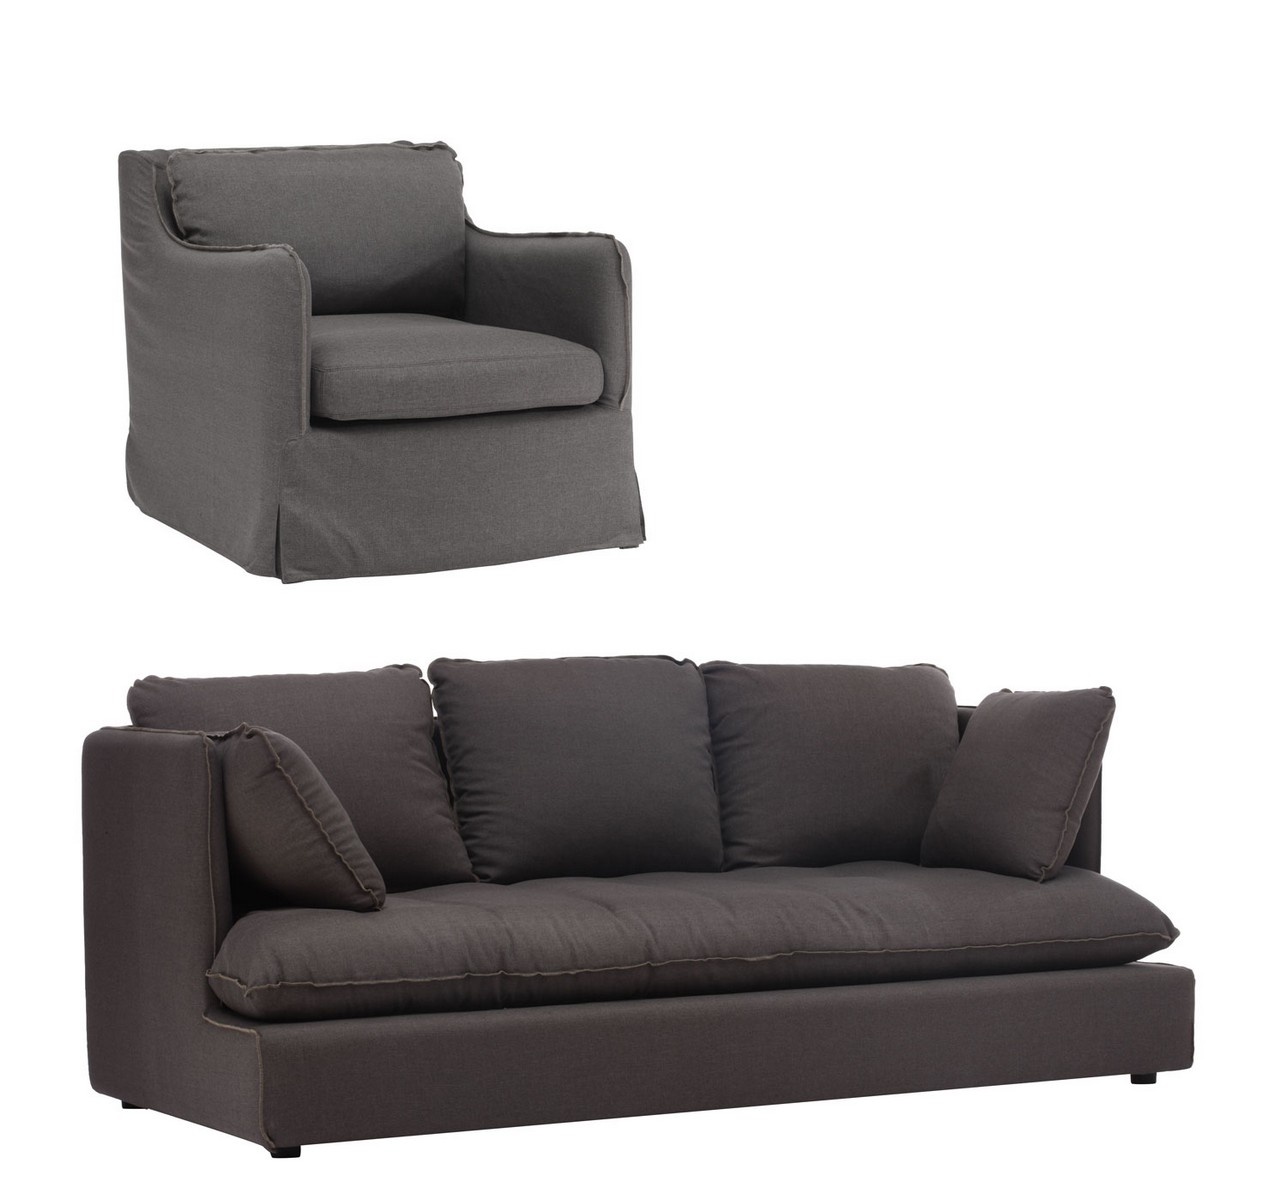 Zuo Modern Pacific Heights Sofa Set - Charcoal Gray